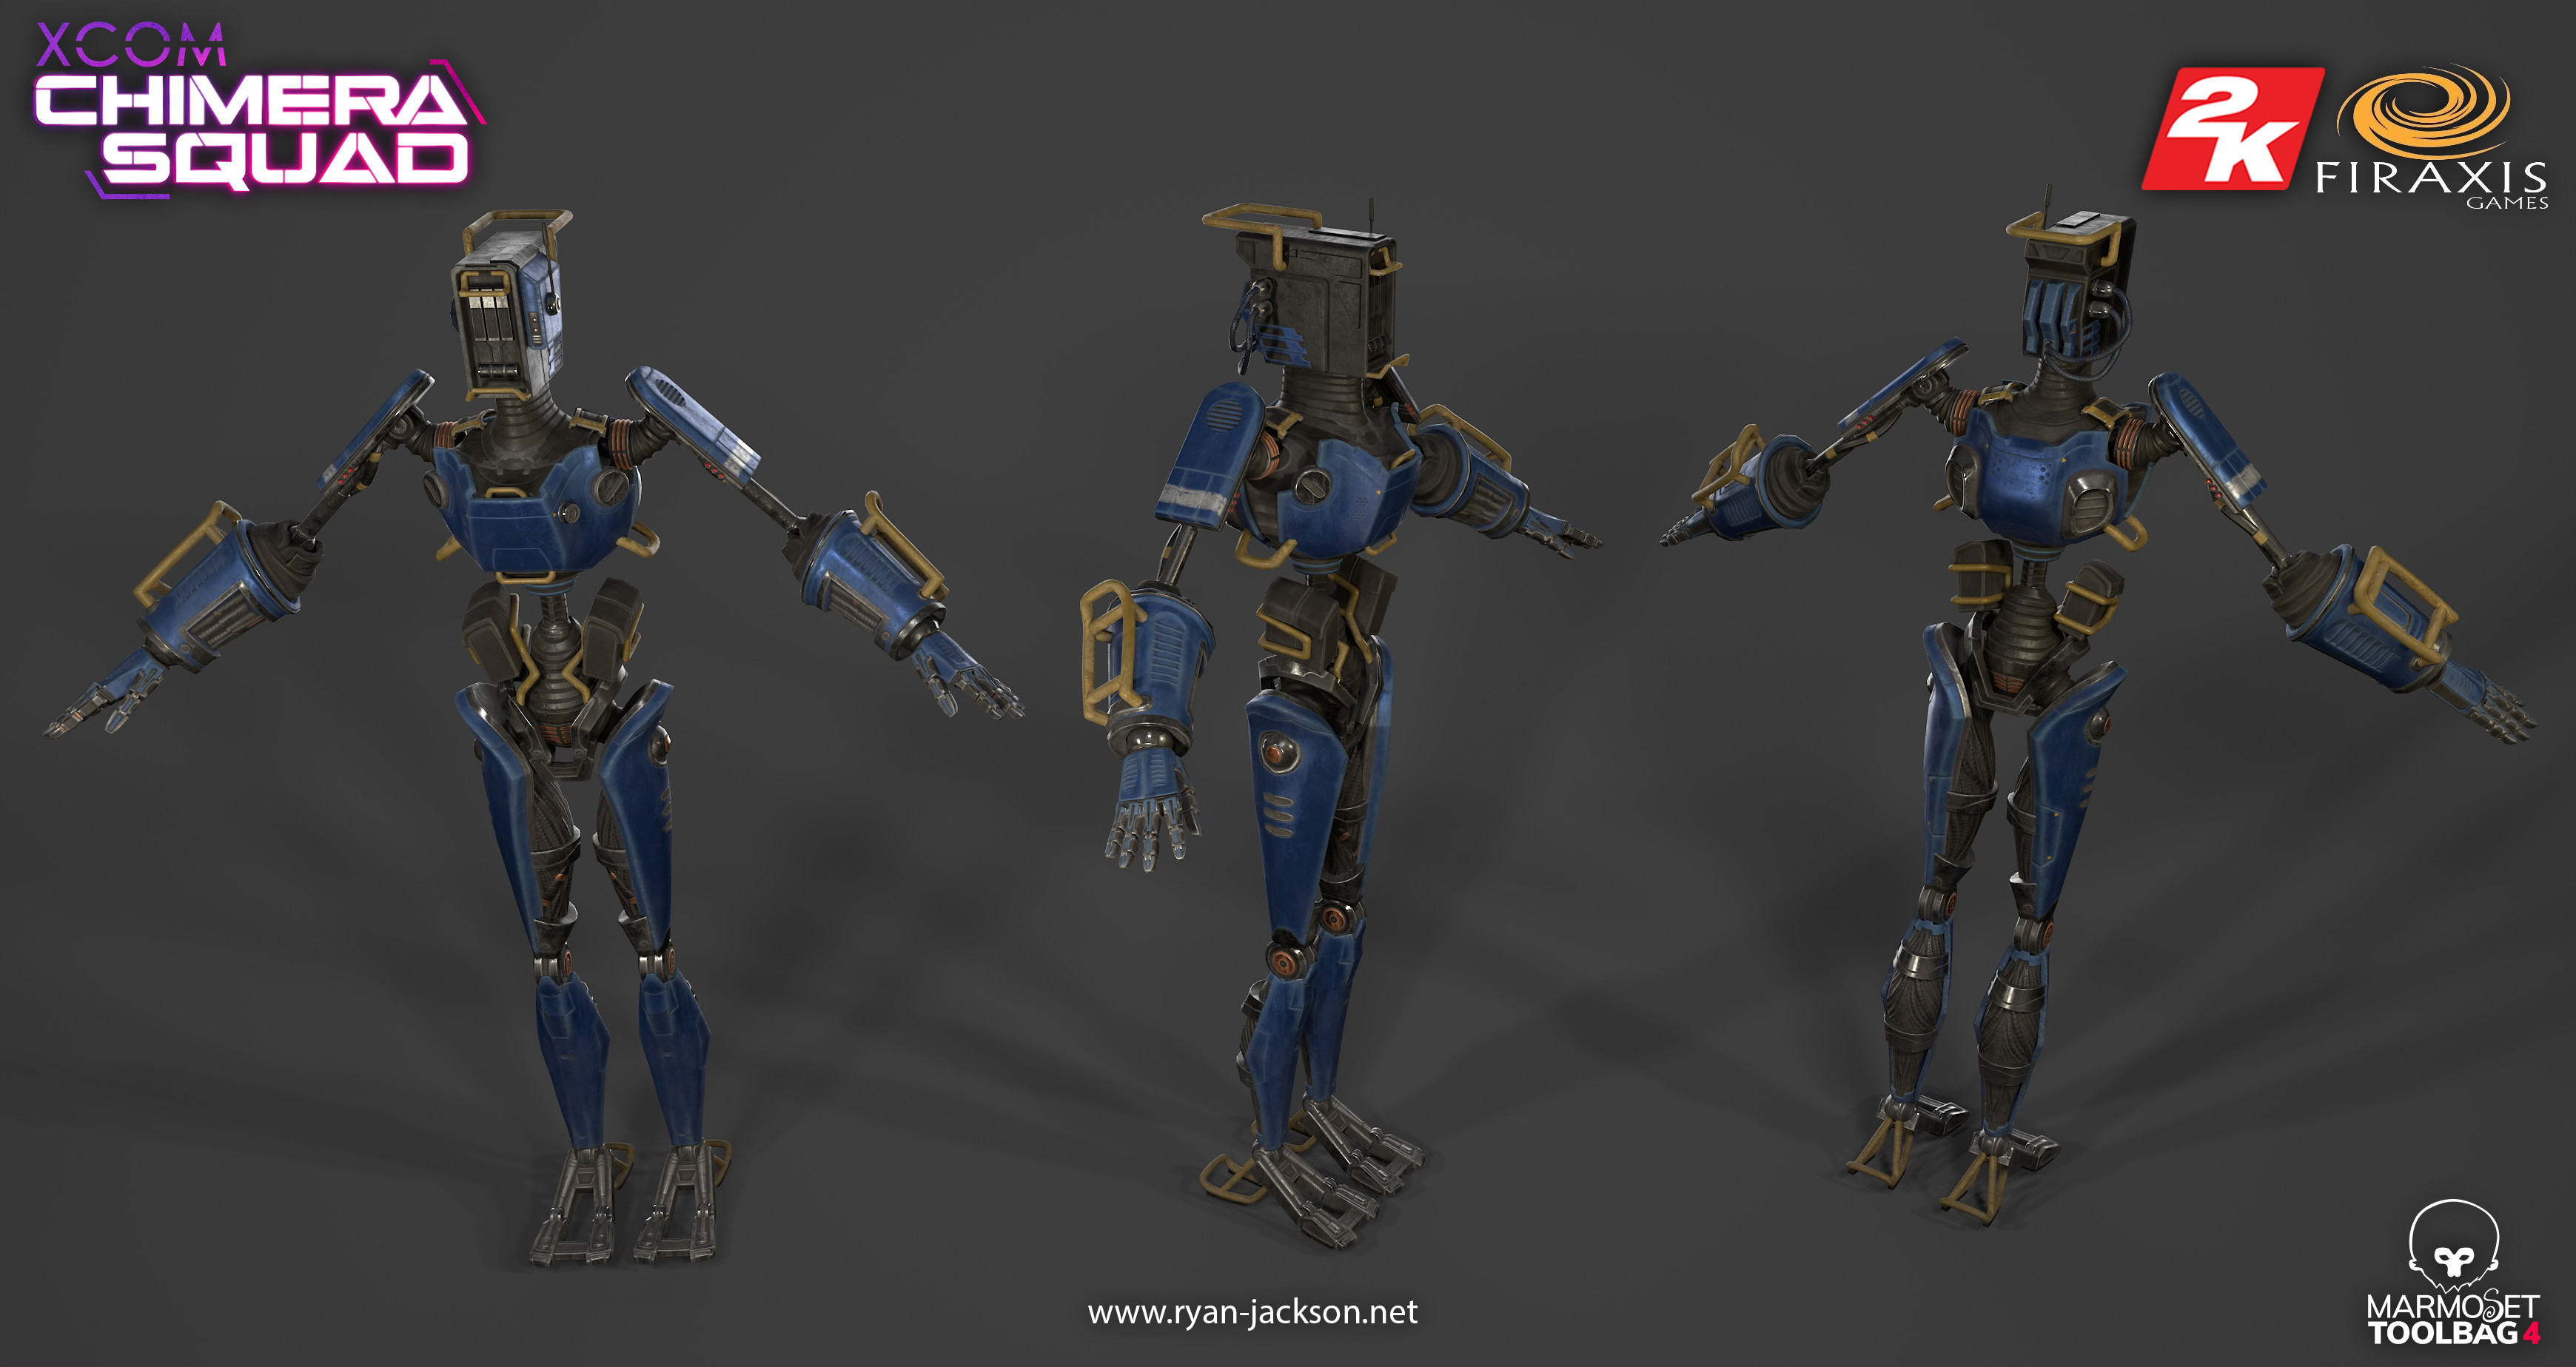 The game-rez Android mesh w/ original blue/yellow paint scheme as featured in the concept art.